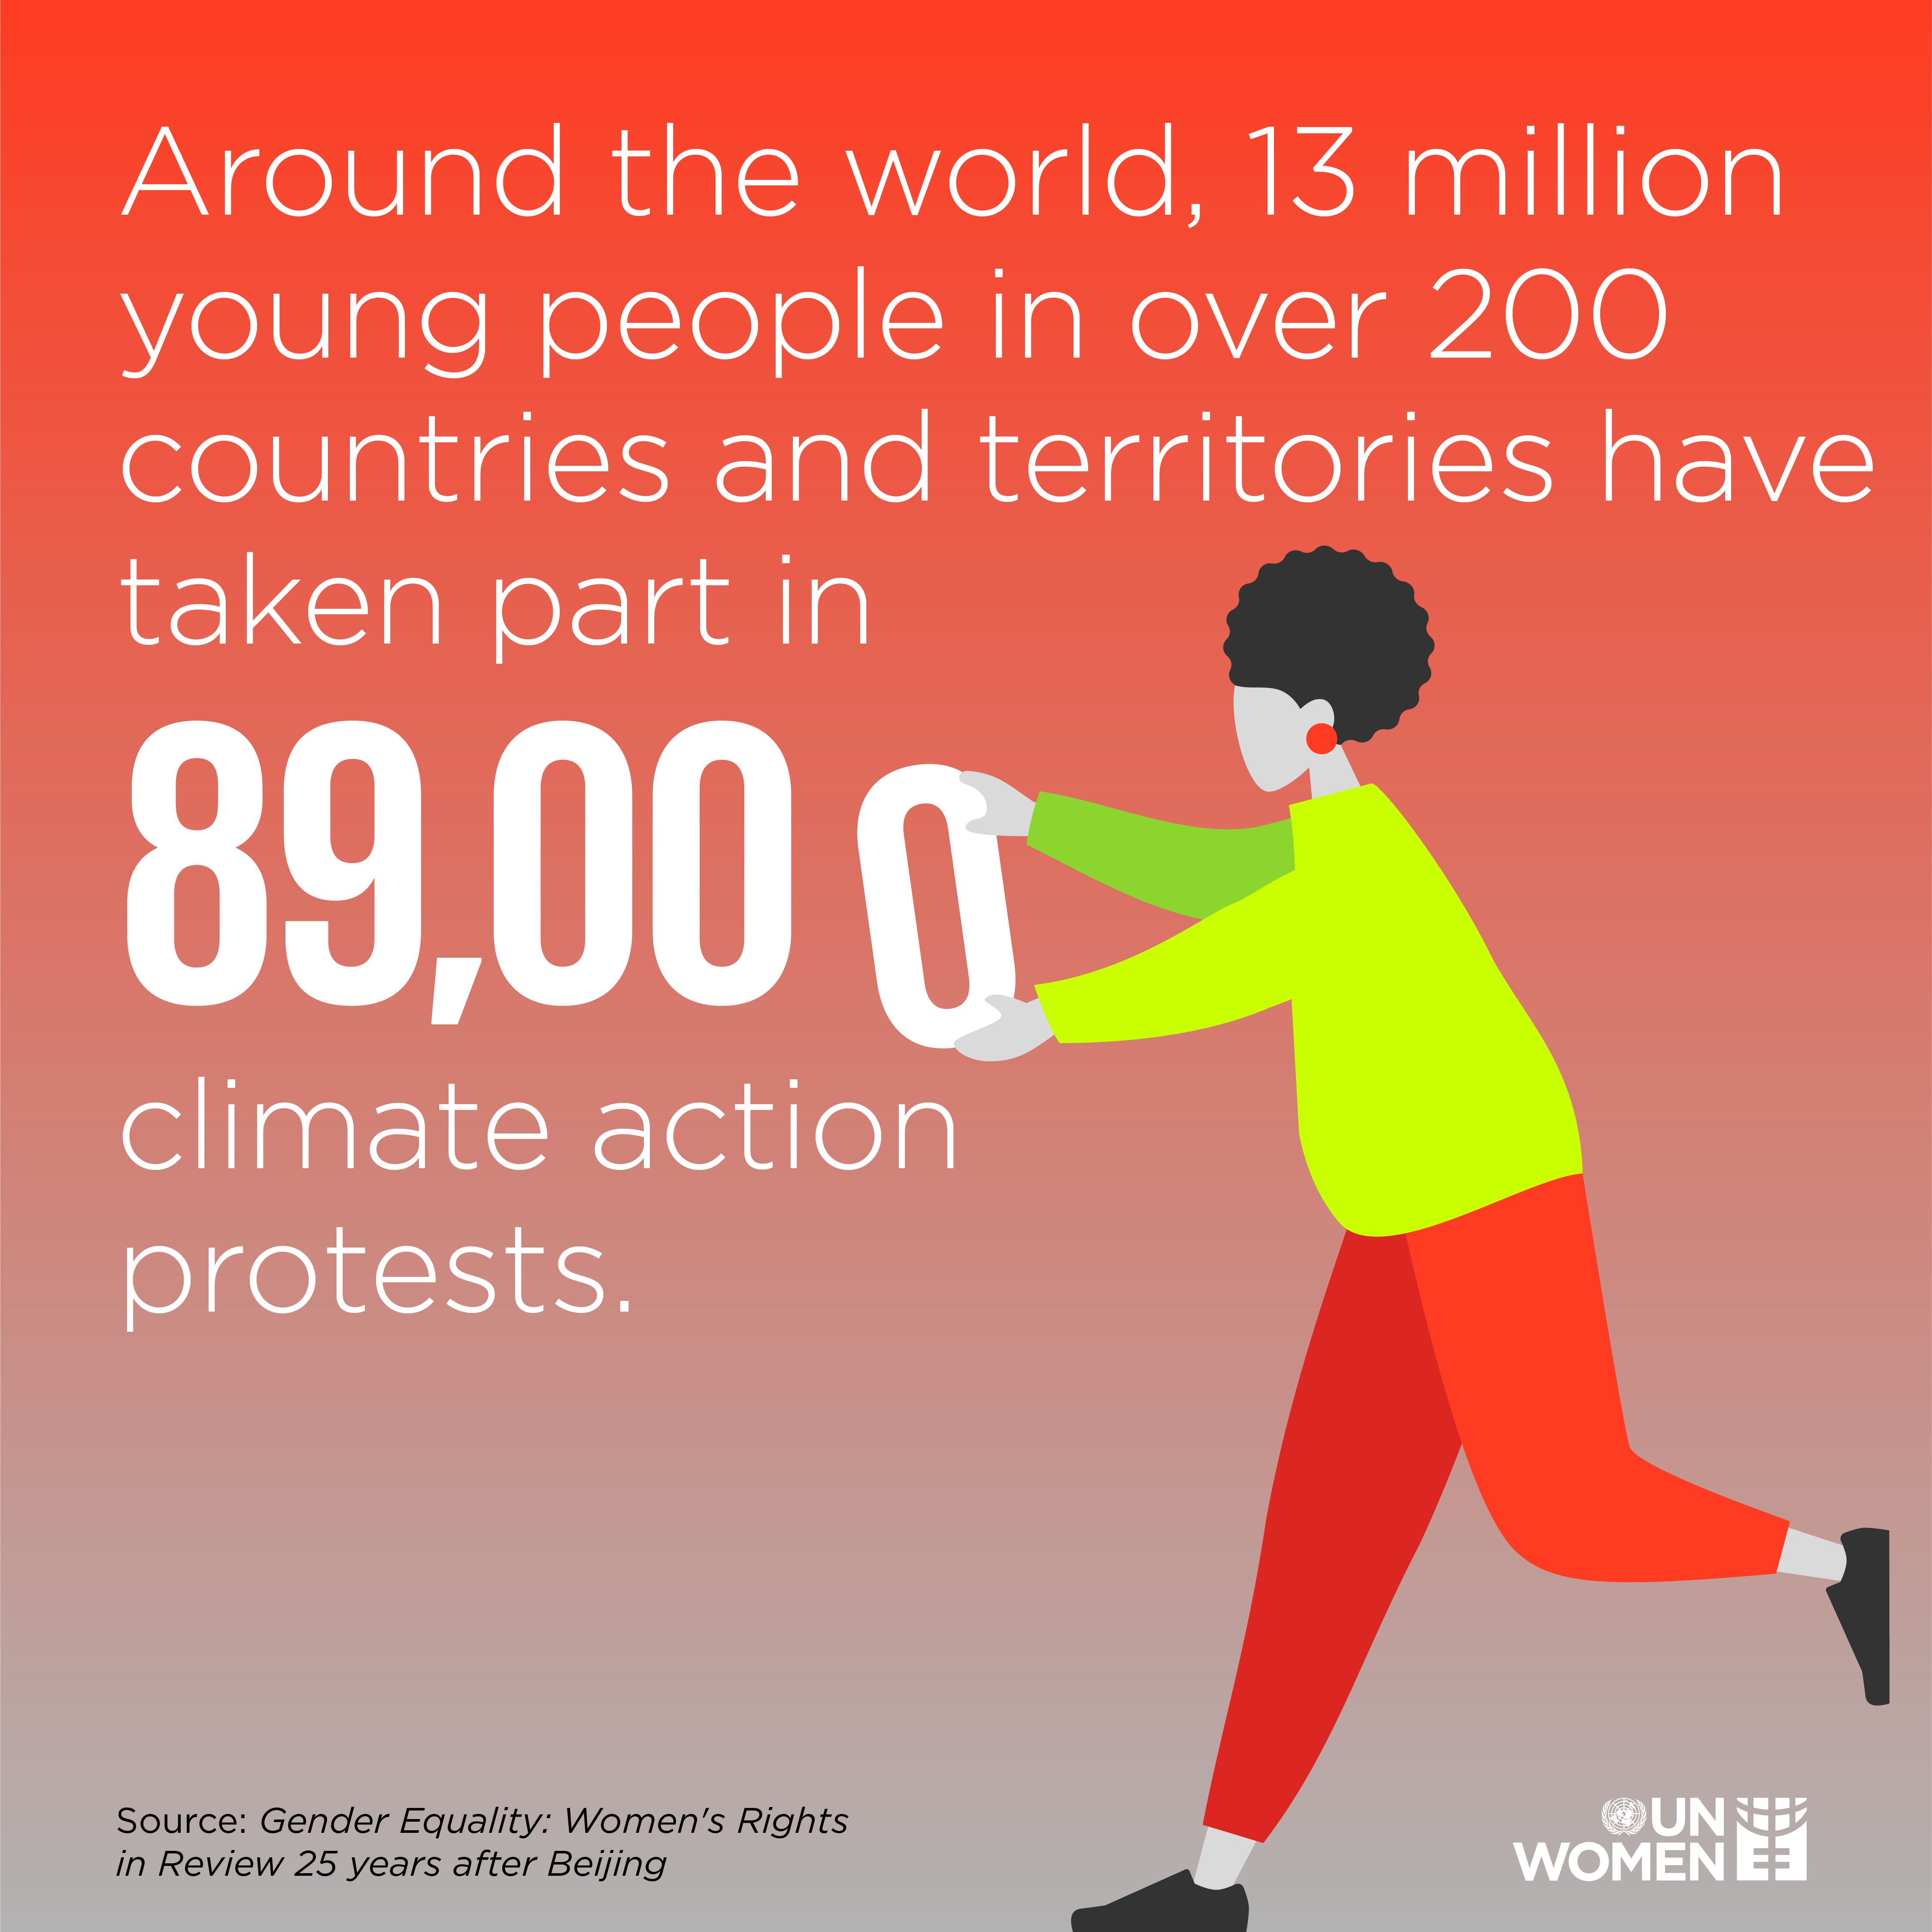 Around the world, 13 million young people in over 200 countries and territories have taken part in 89,000 climate action protests. 